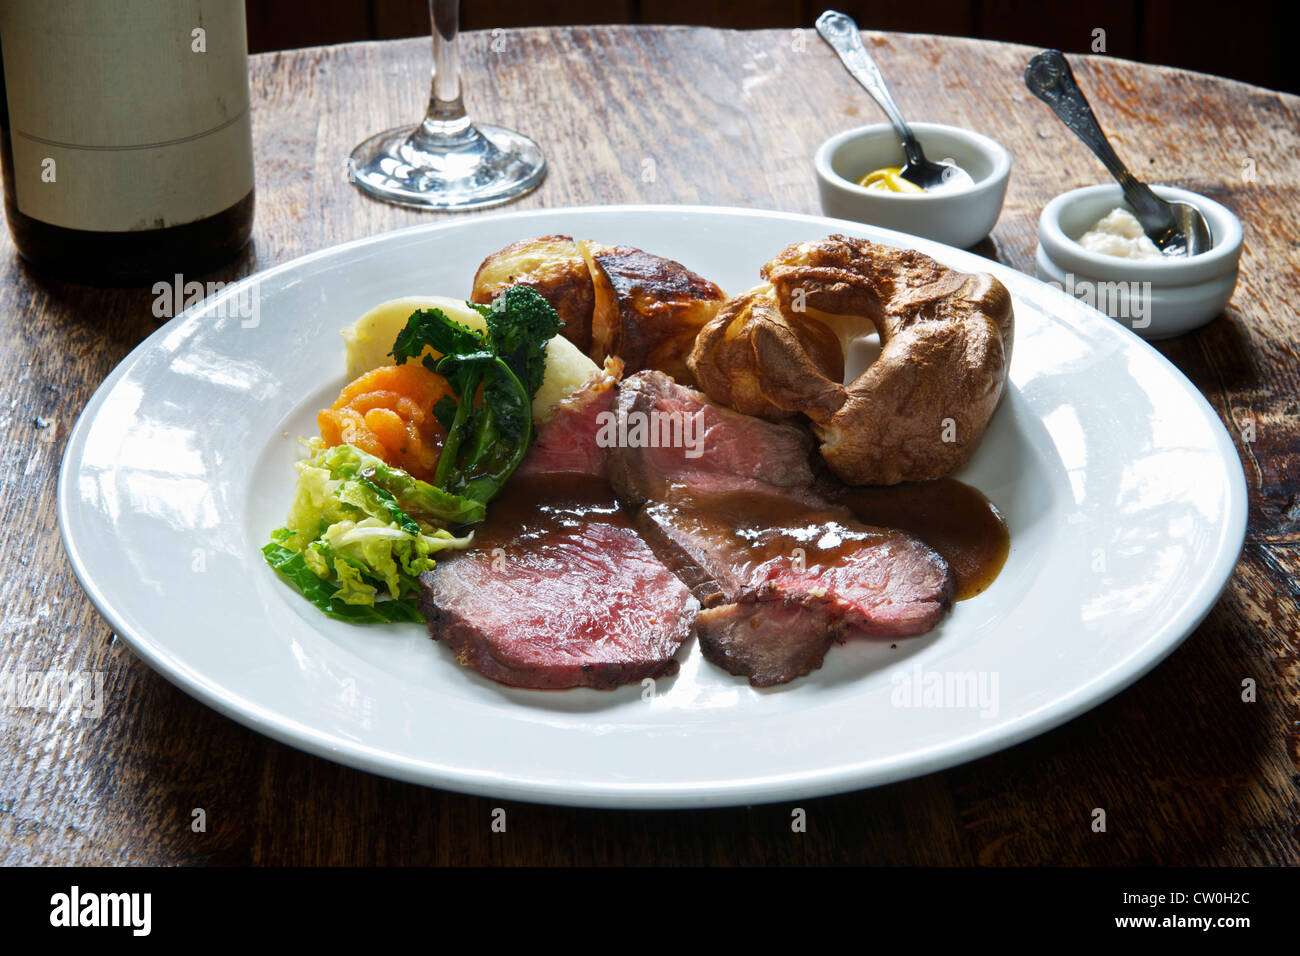 Plate of roast beef with vegetables Stock Photo